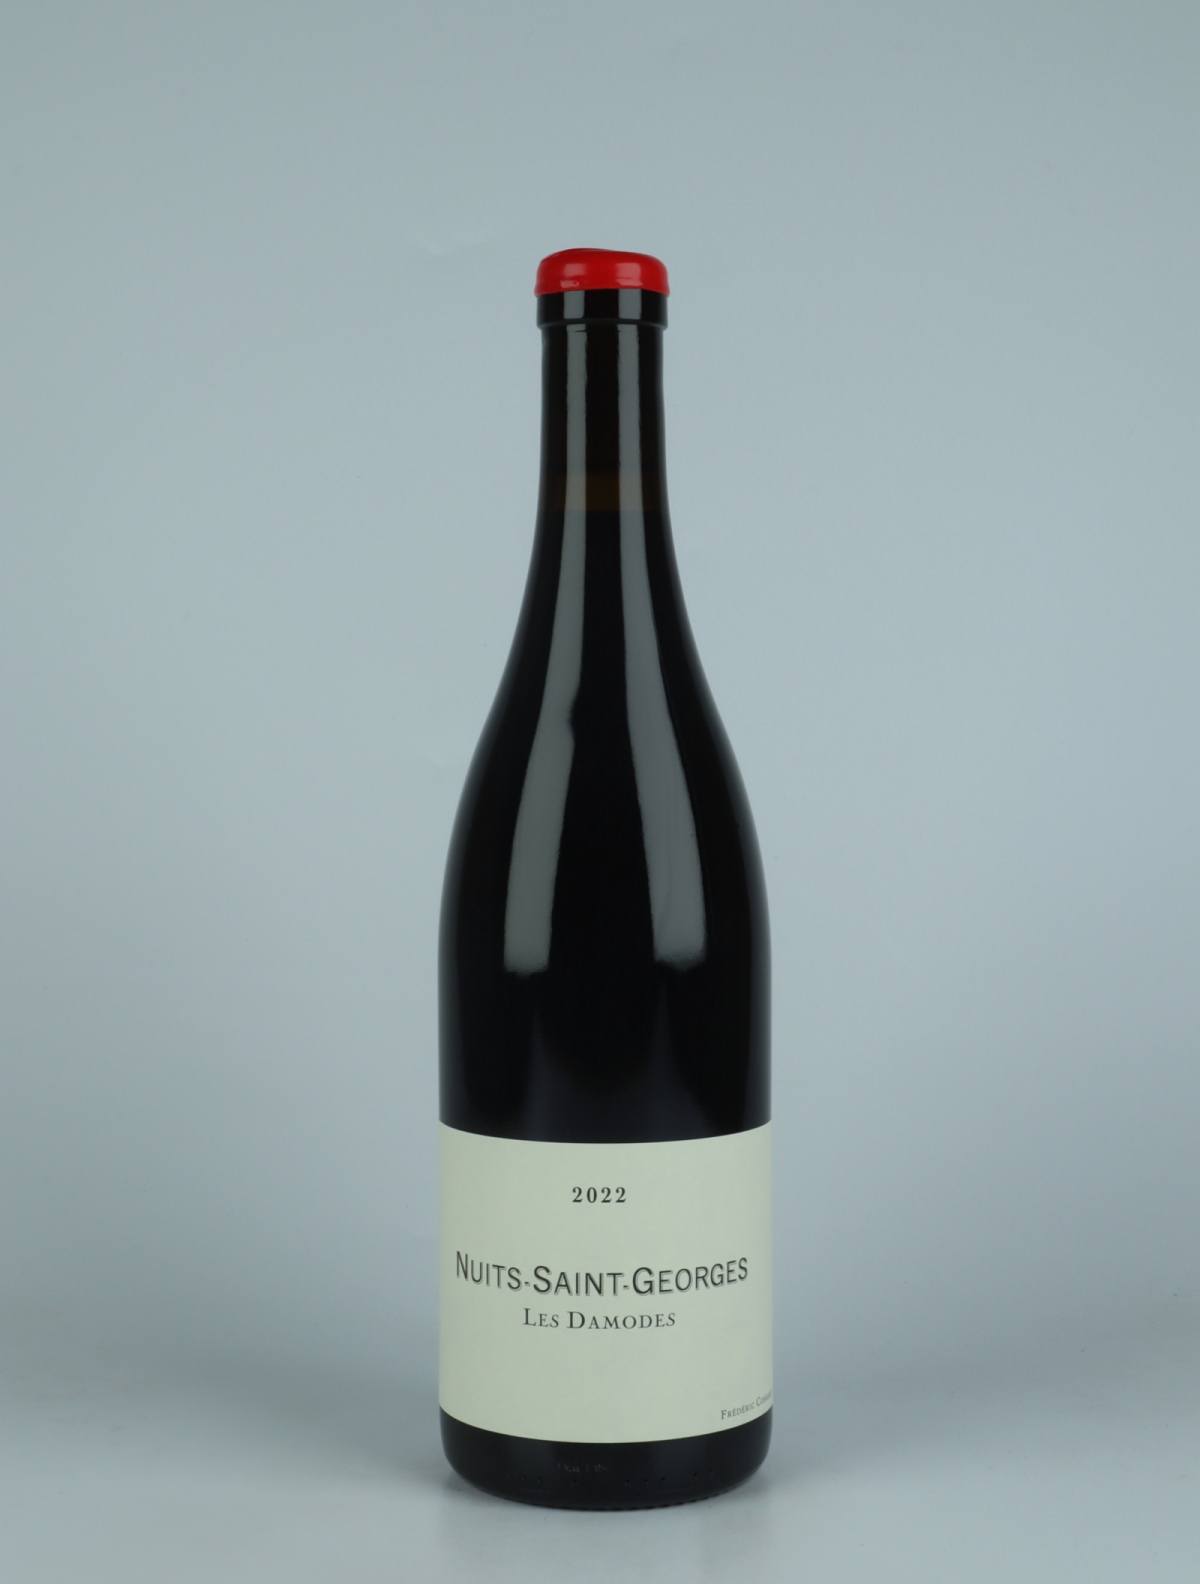 A bottle 2022 Nuits Saint Georges - Les Damodes Red wine from Frédéric Cossard, Burgundy in France